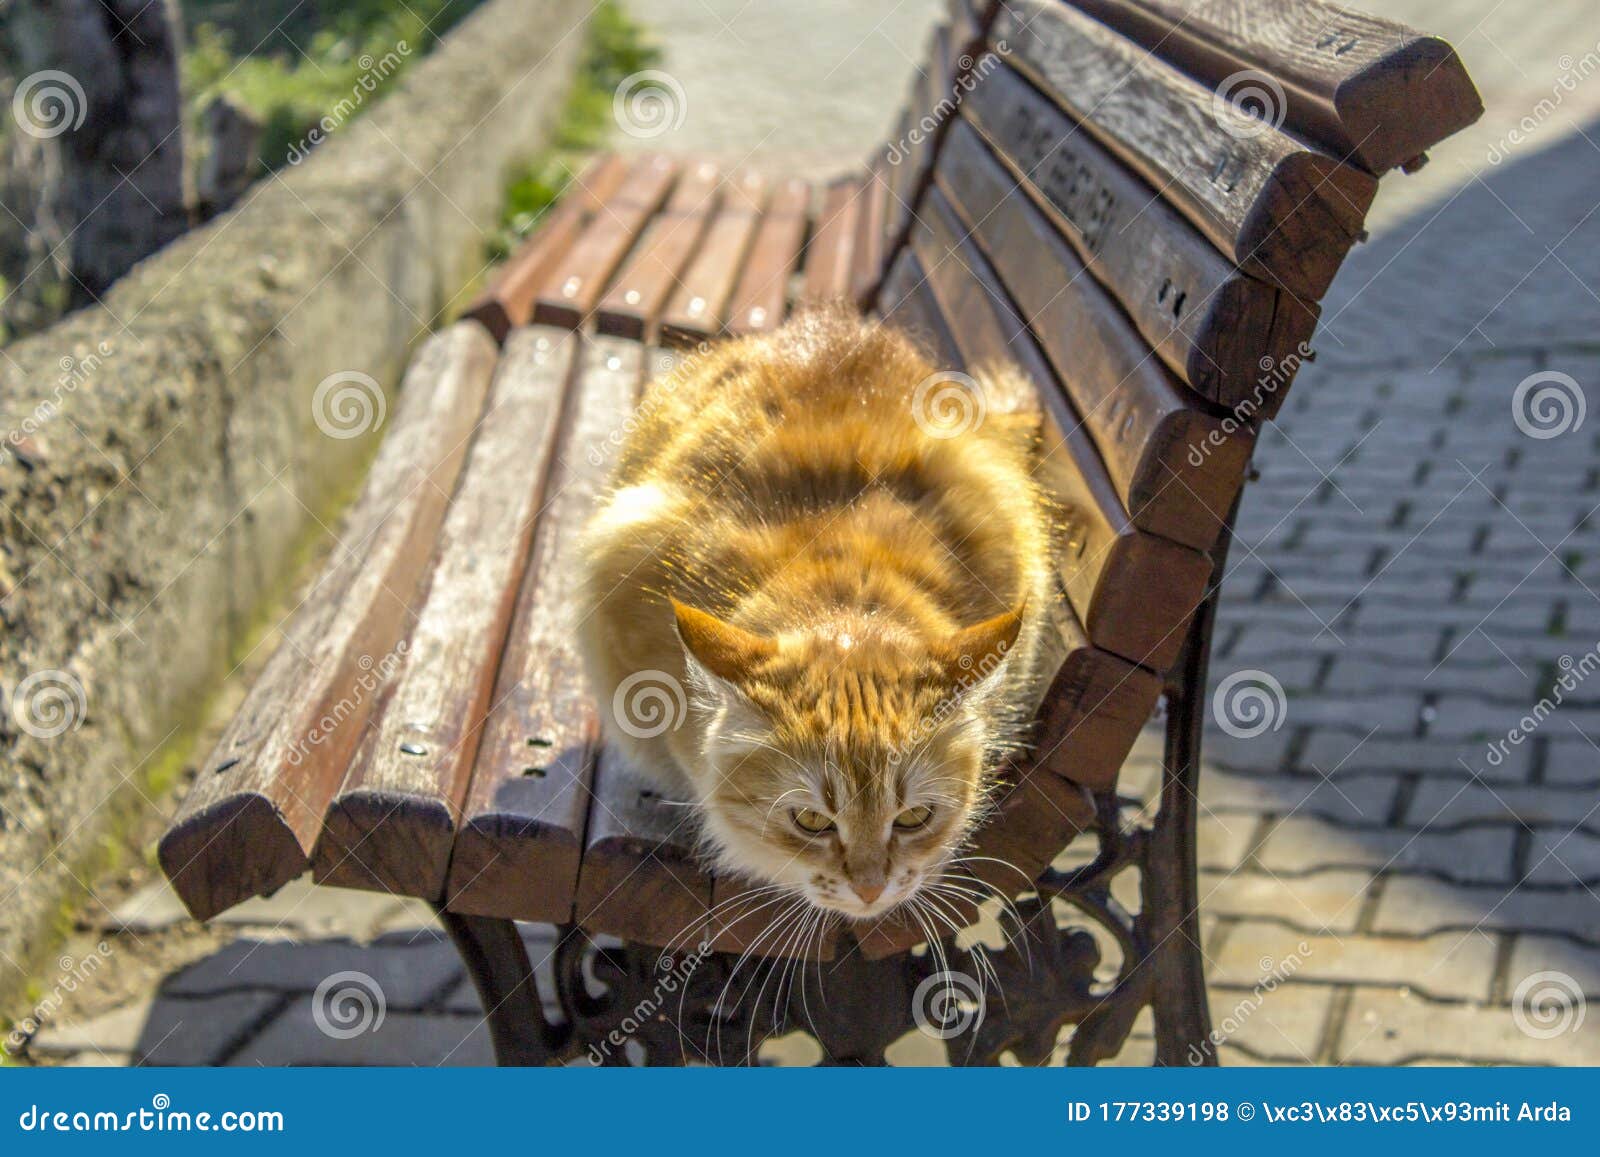 Yellow Cute Cat is Standing on a Bench Stock Photo - Image of brown ...